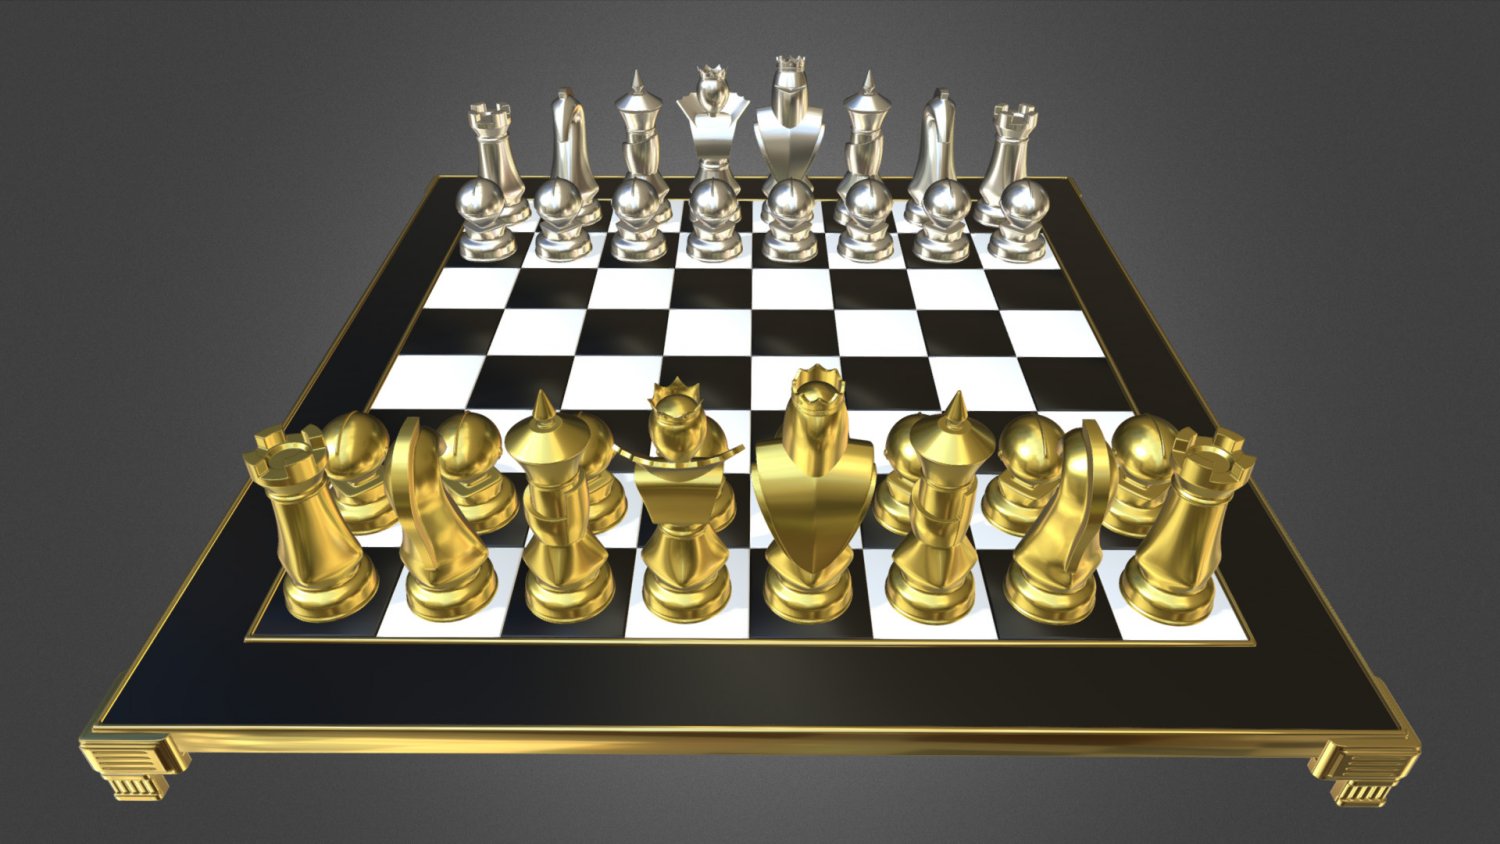 3D Chess Game Offline by Maxwell Gold